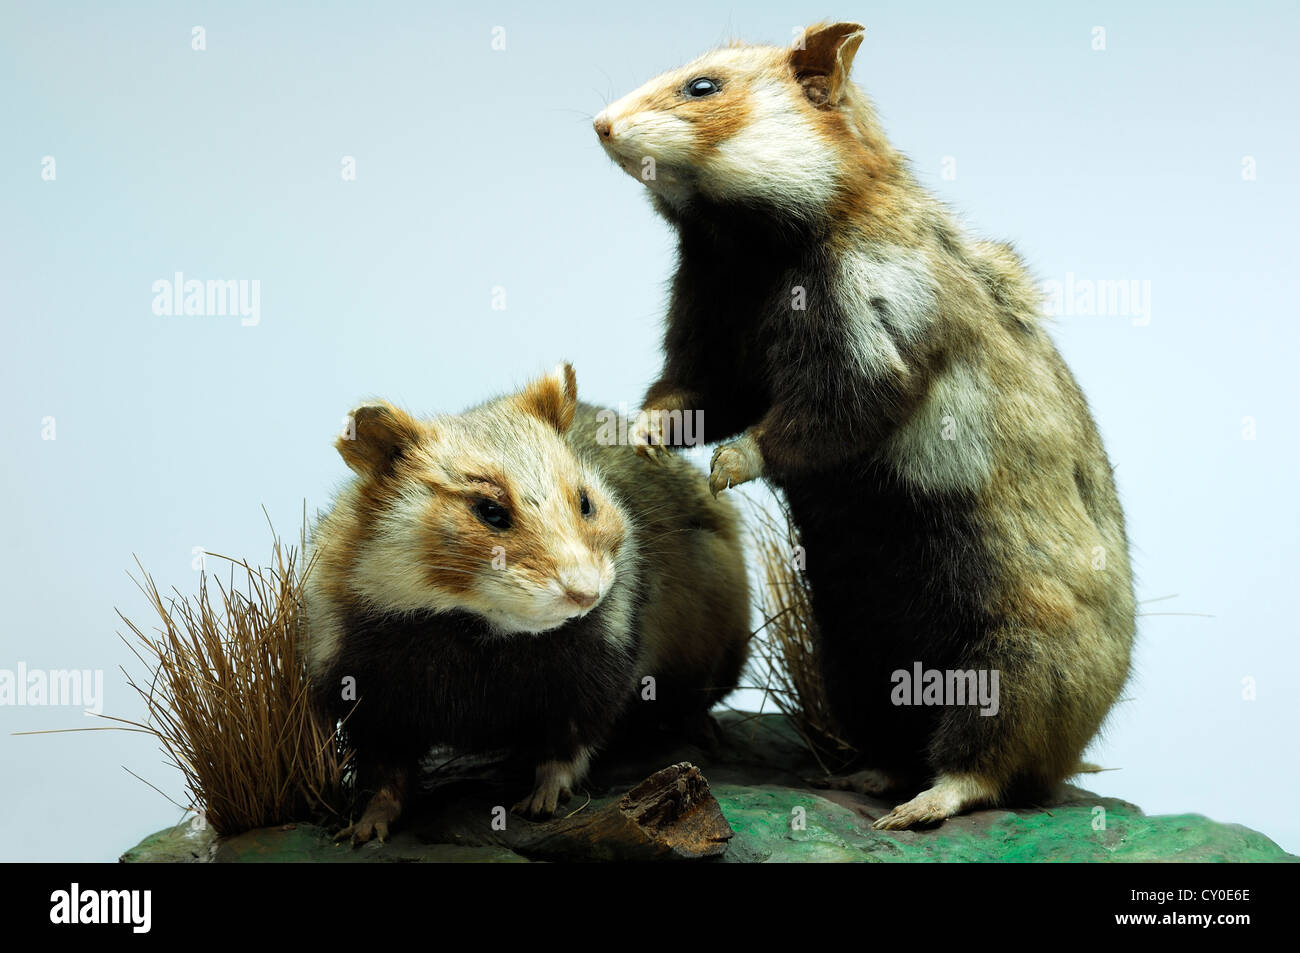 Stuffed animals, European hamsters (Cricetus cricetus), 2012 special exhibition at the industrial museum Stock Photo